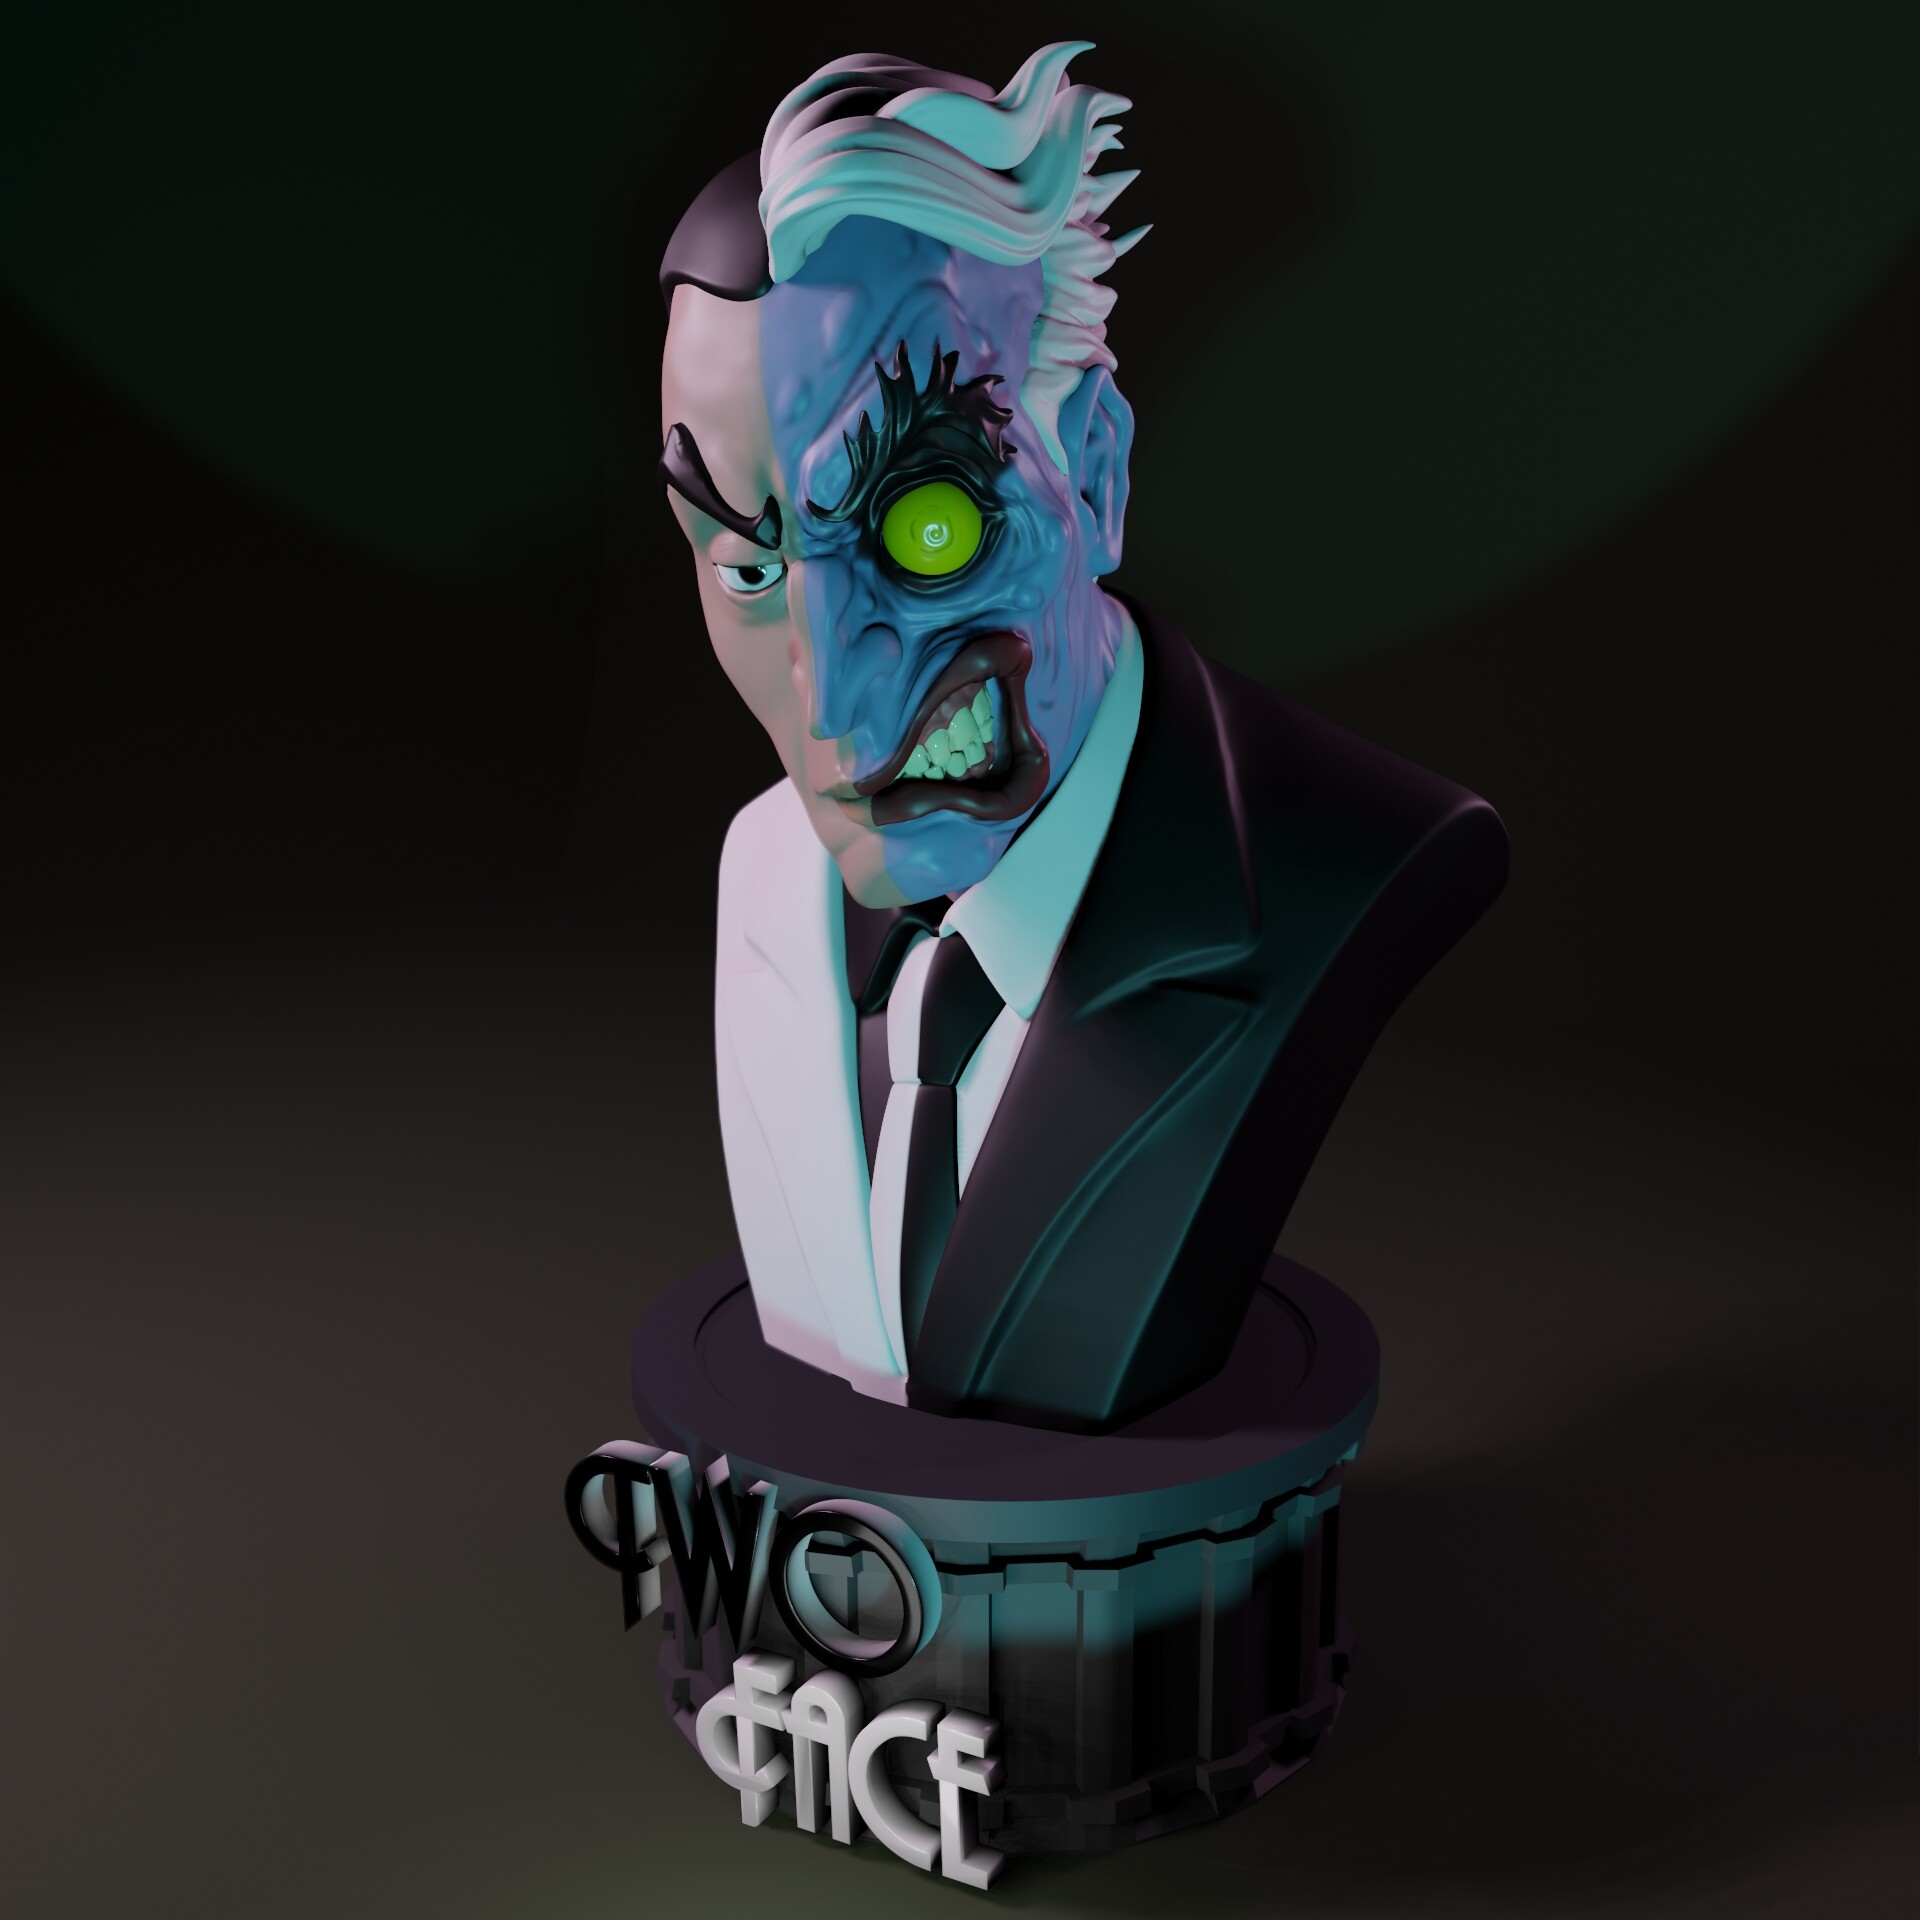 ArtStation - Two Face bust - Batman animated series